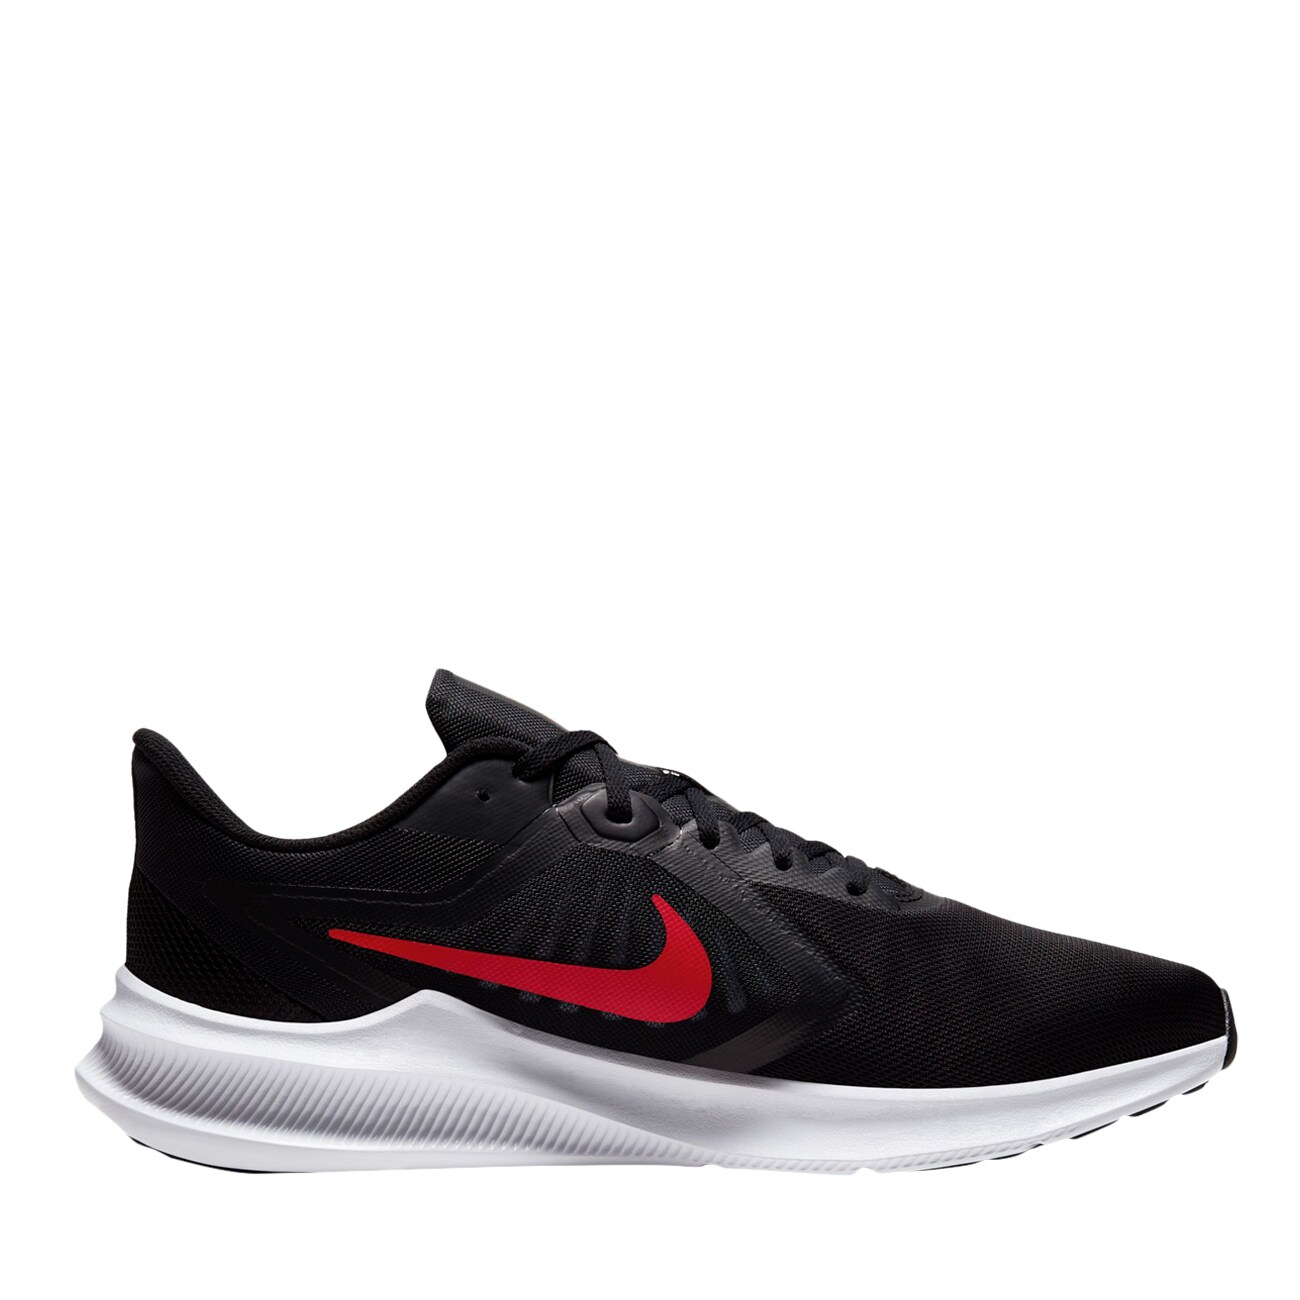 nike wide shoes canada